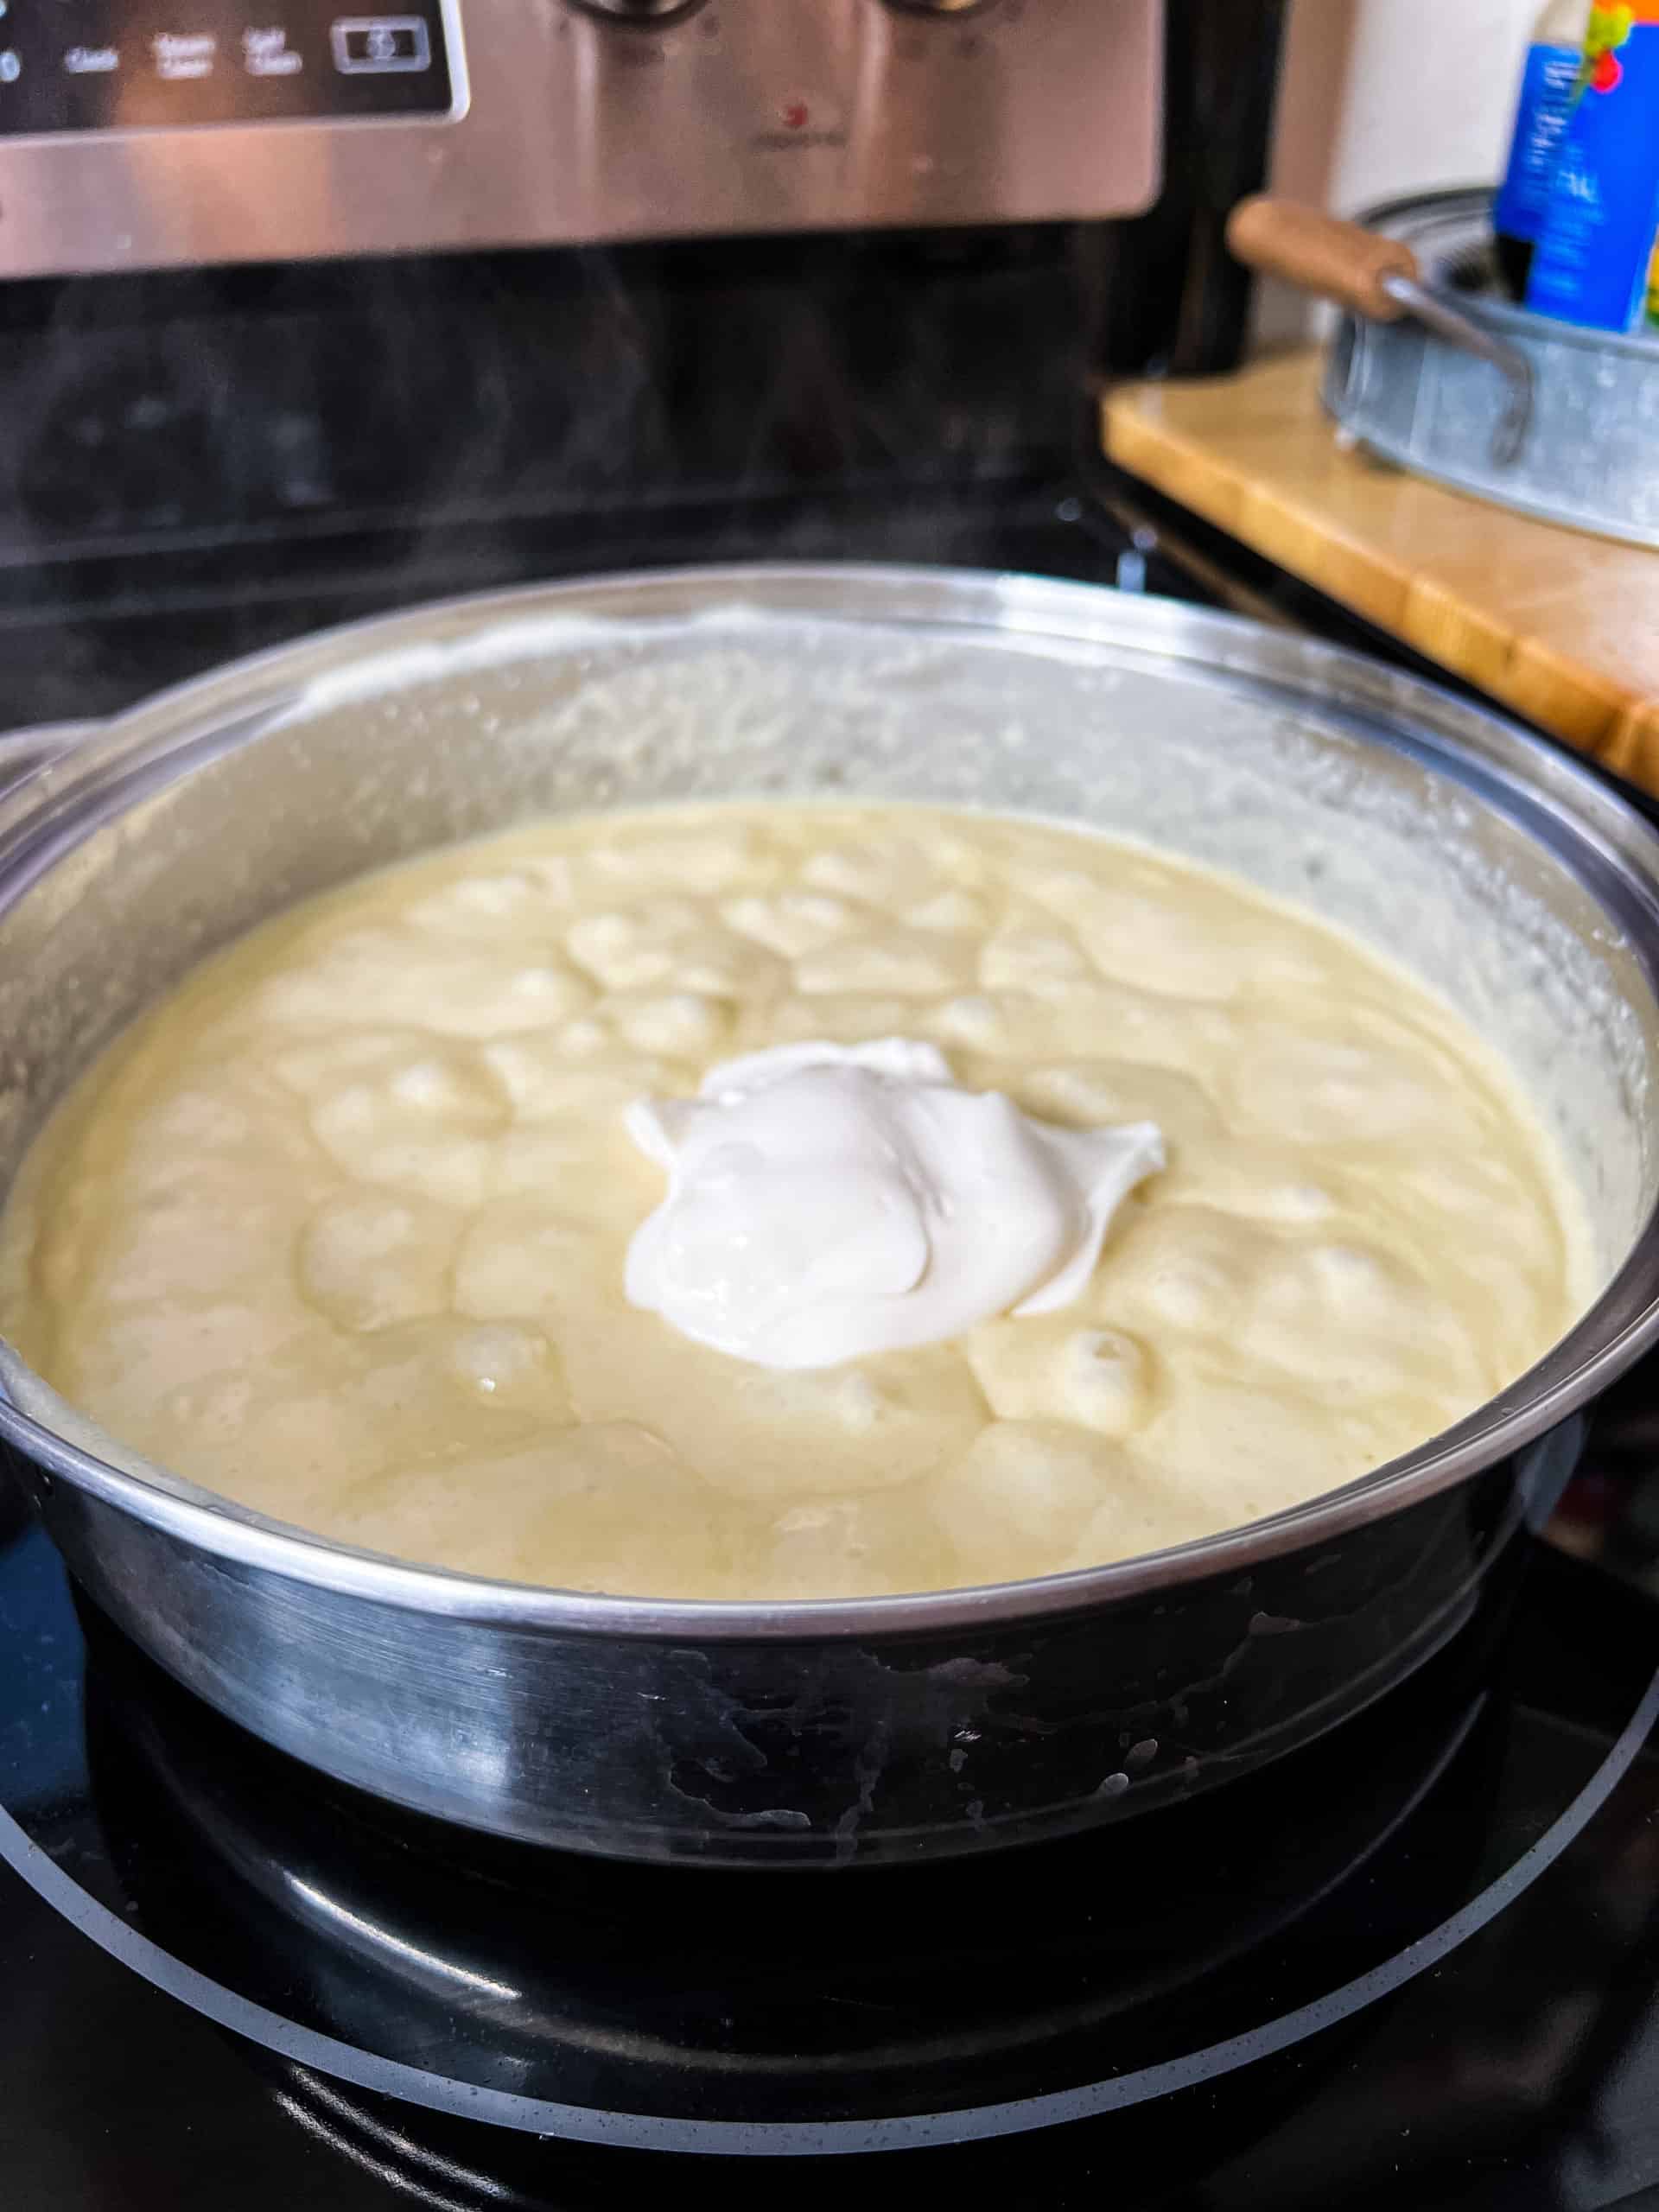 a dollop of mayonnaise on top of Alfredo sauce in a stainless steel pan